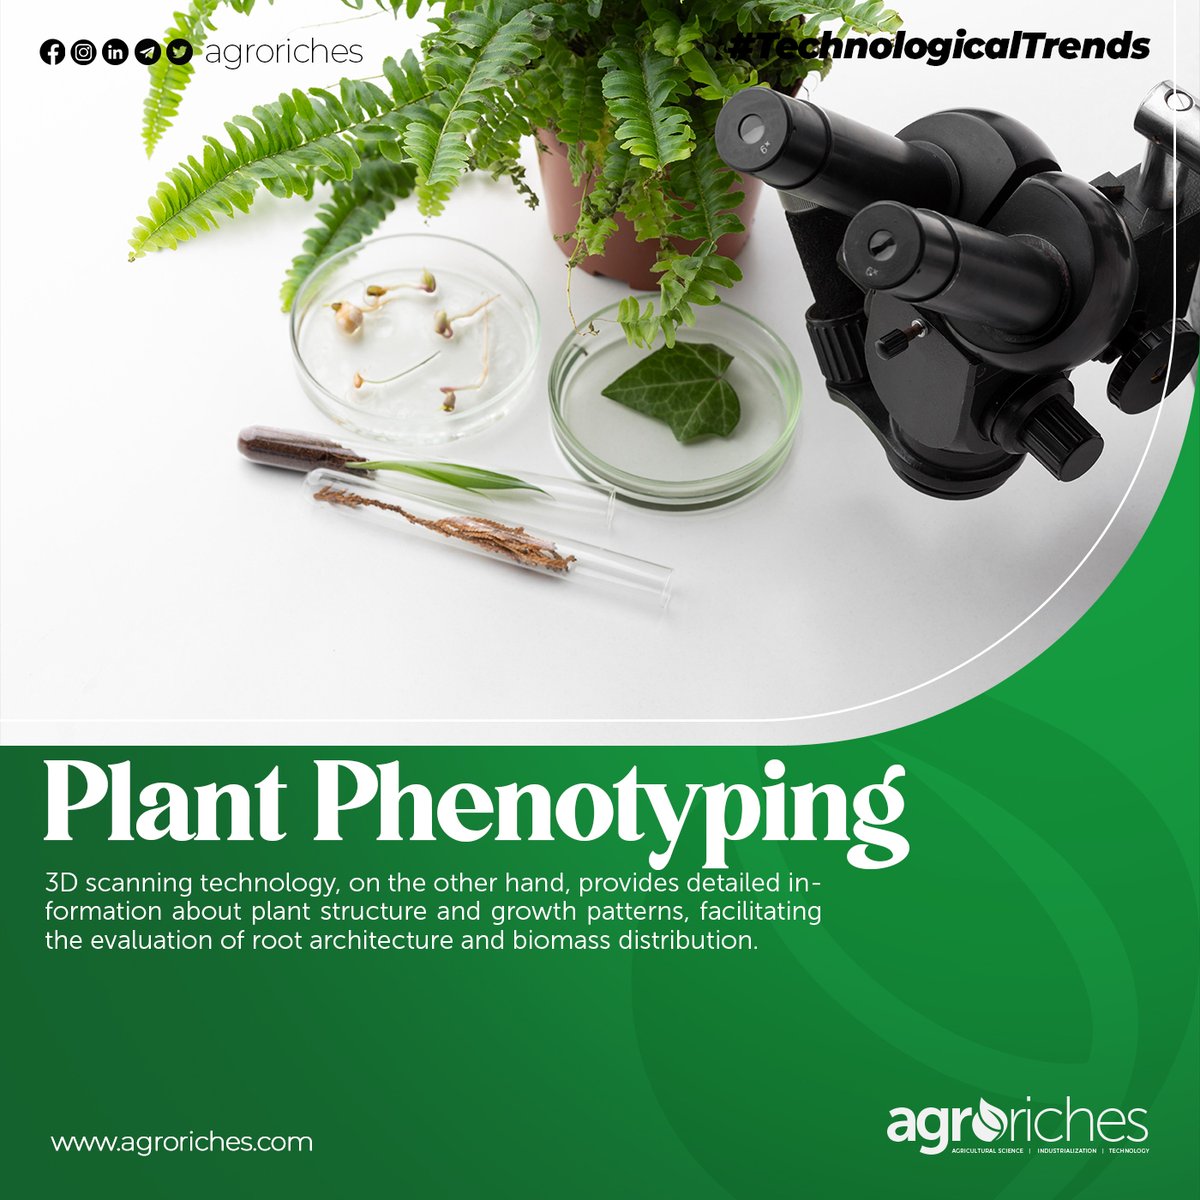 plant phenotyping, a 3d scanning technology.
Visit our website agroriches.com, to know the uses and benefits.

#agroriches #agriculturaltrends #agriculturenews #exploreghana #trendinginghana #machine #ghana #technews #farming #growth #agriculture #cocoa #crops #plants